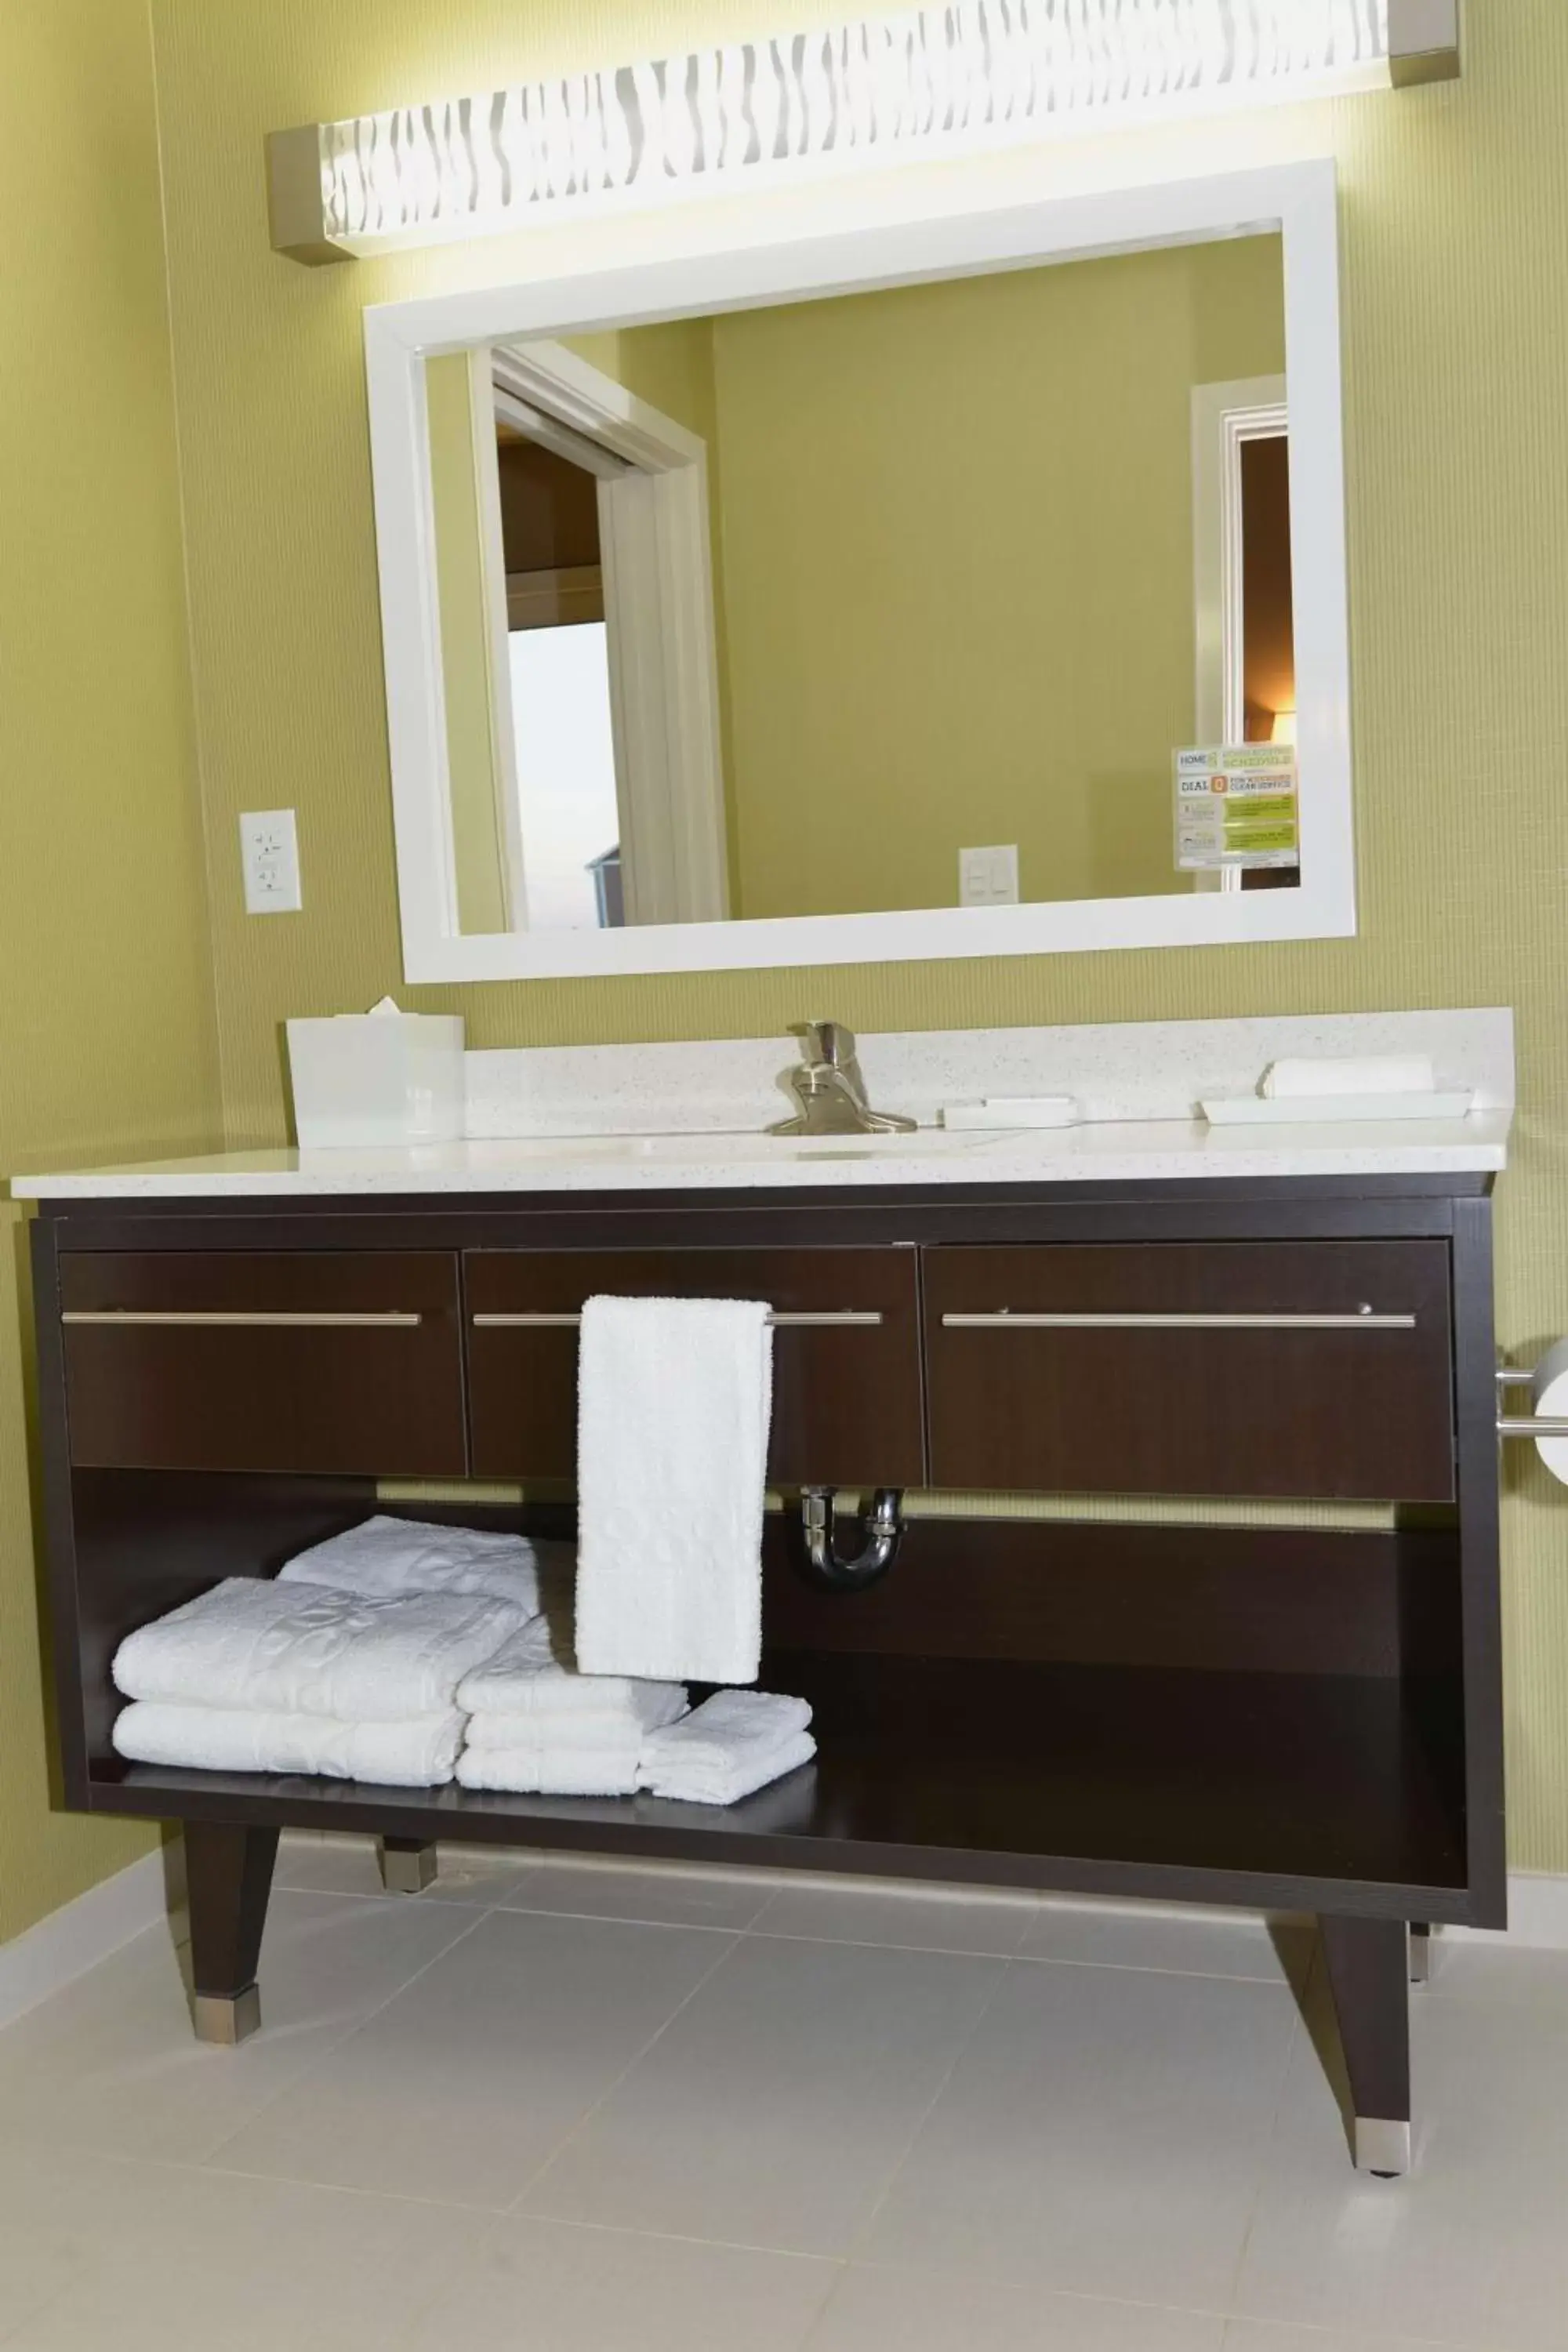 Bathroom in Home2 Suites by Hilton Lake City